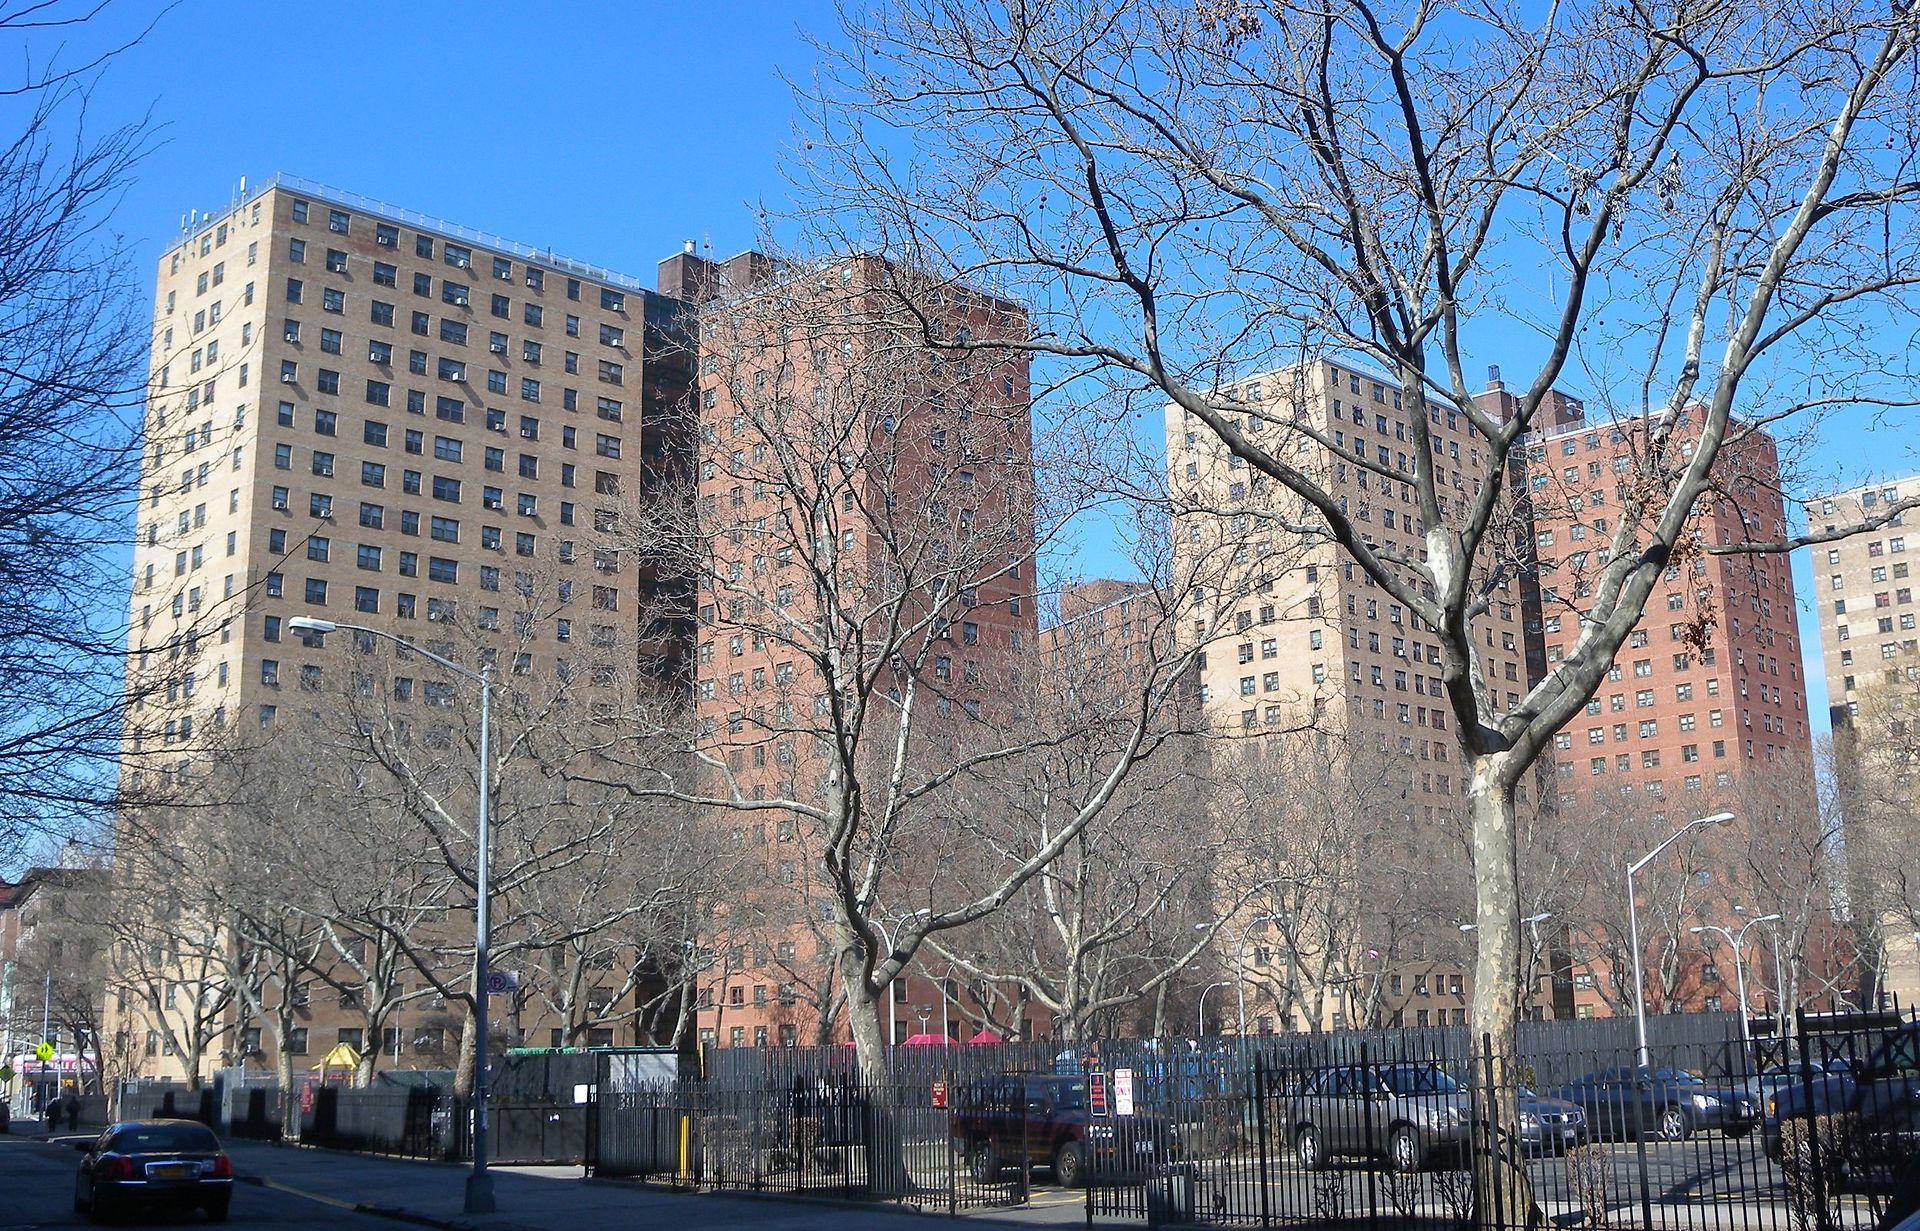 NYC commits $500M in plan to build thousands of affordable apartments for seniors on unused land